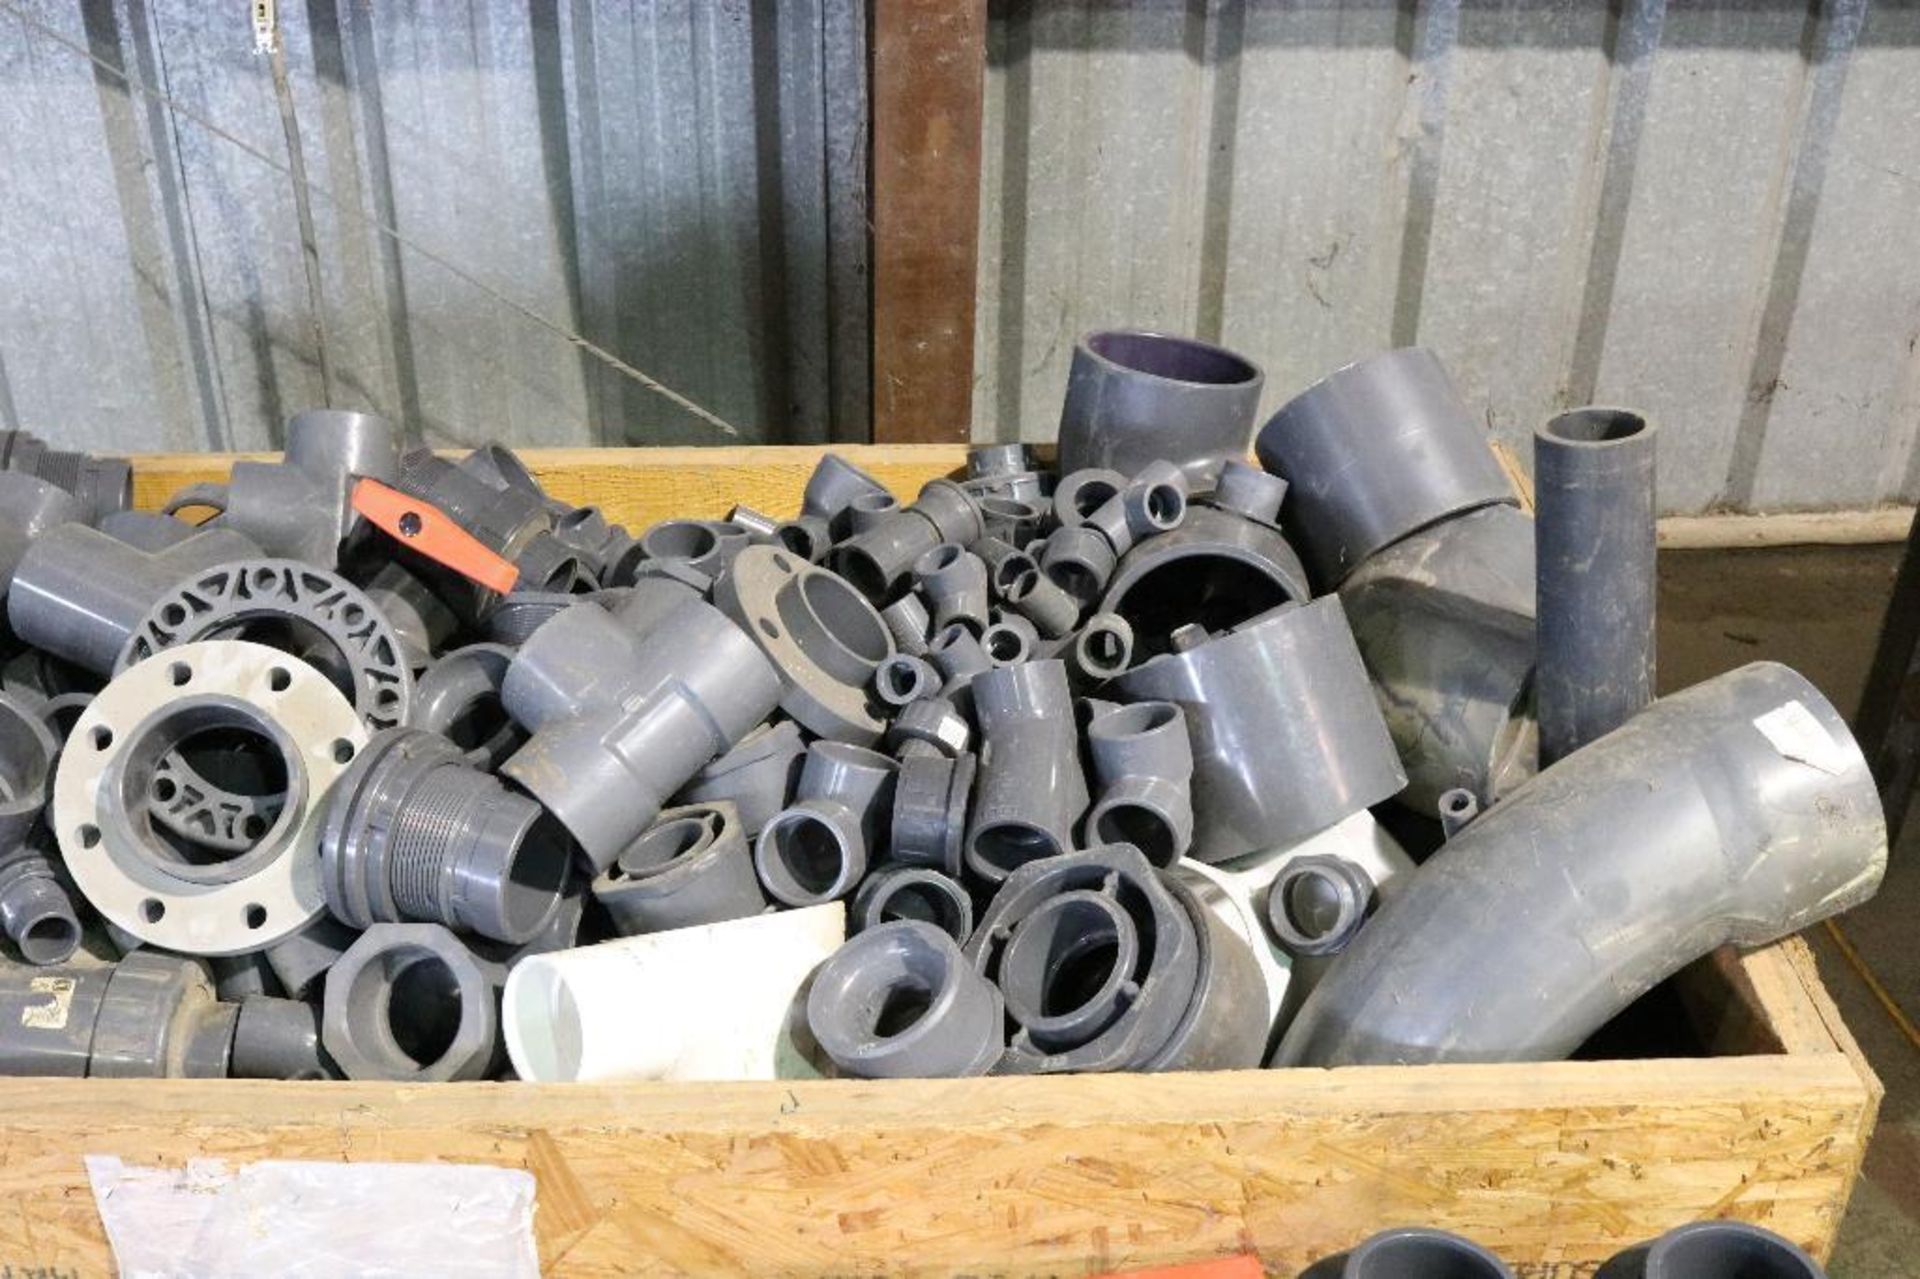 Large Assortment of PVC Valves, Fittings, Flanges, Connections, and More! Various Sizes. See Photo f - Image 3 of 6